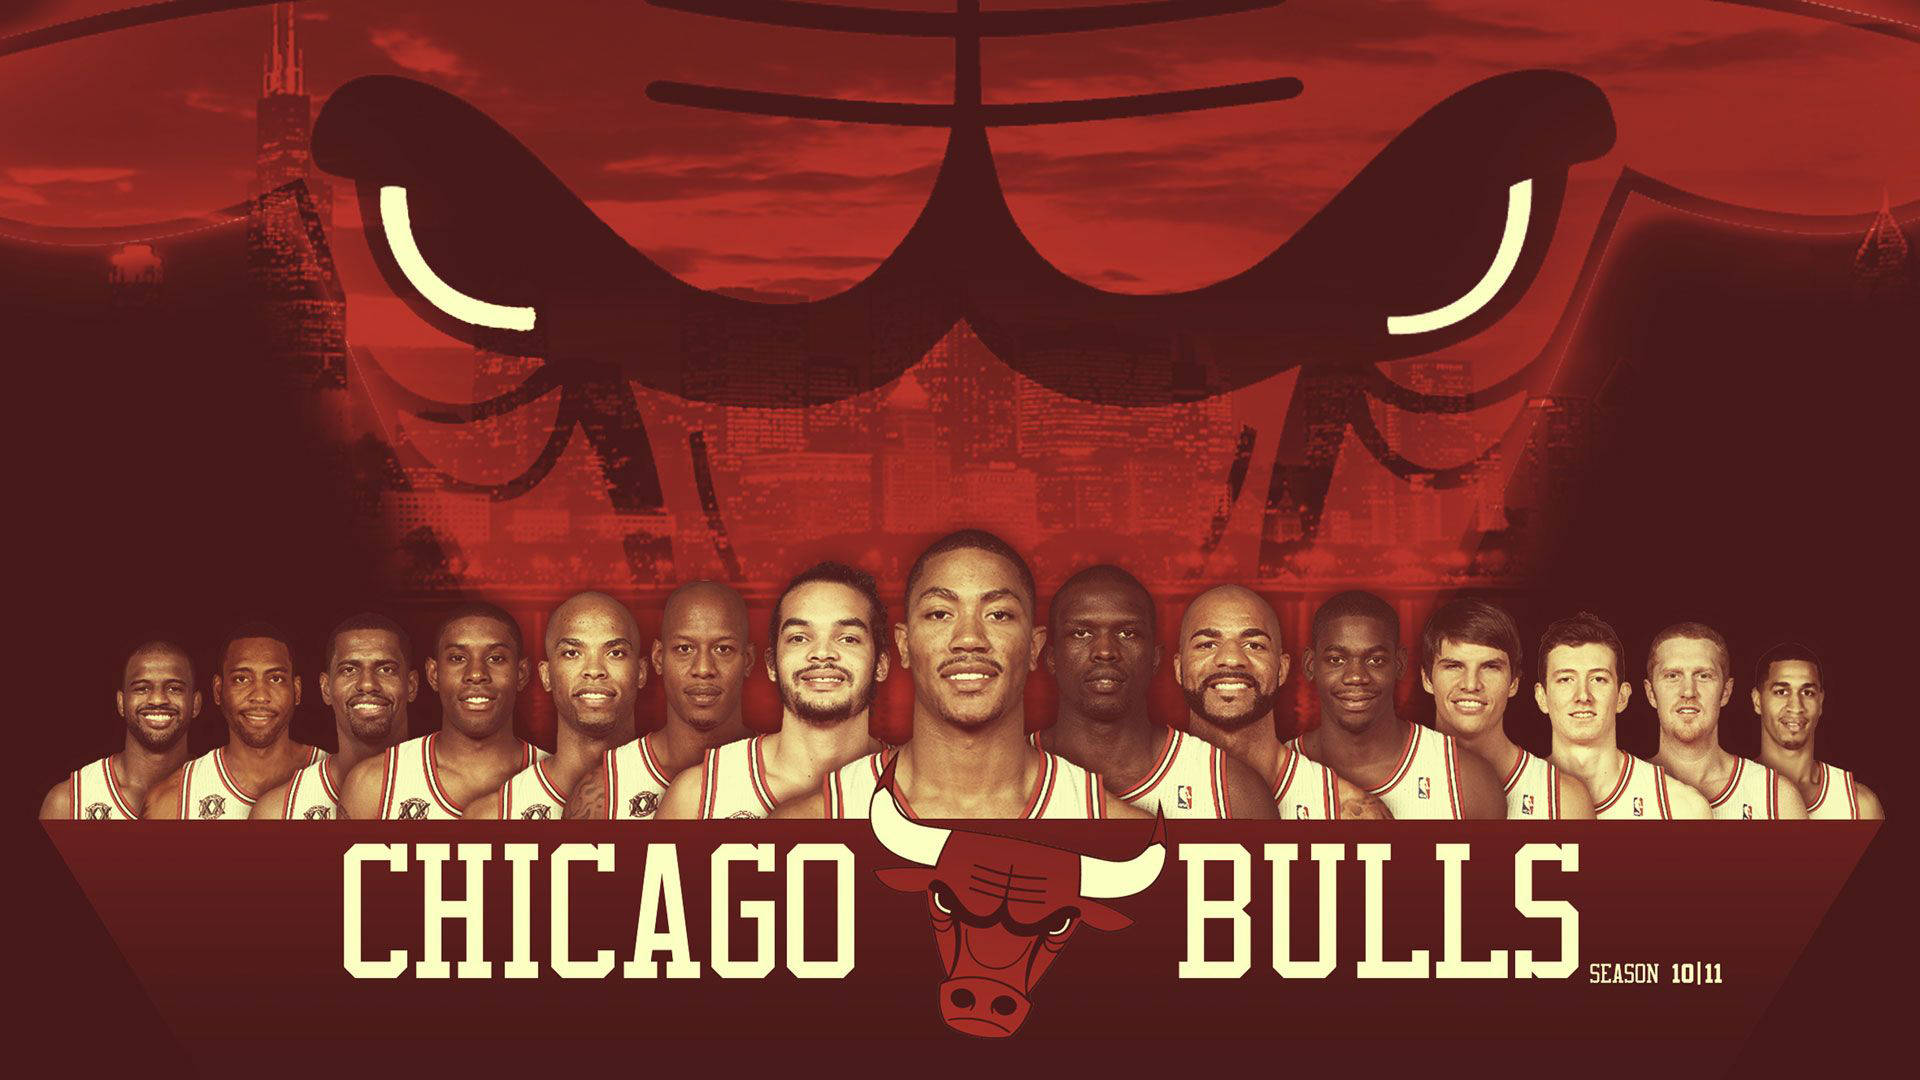 Chicago Bulls 1920X1080 Wallpaper and Background Image